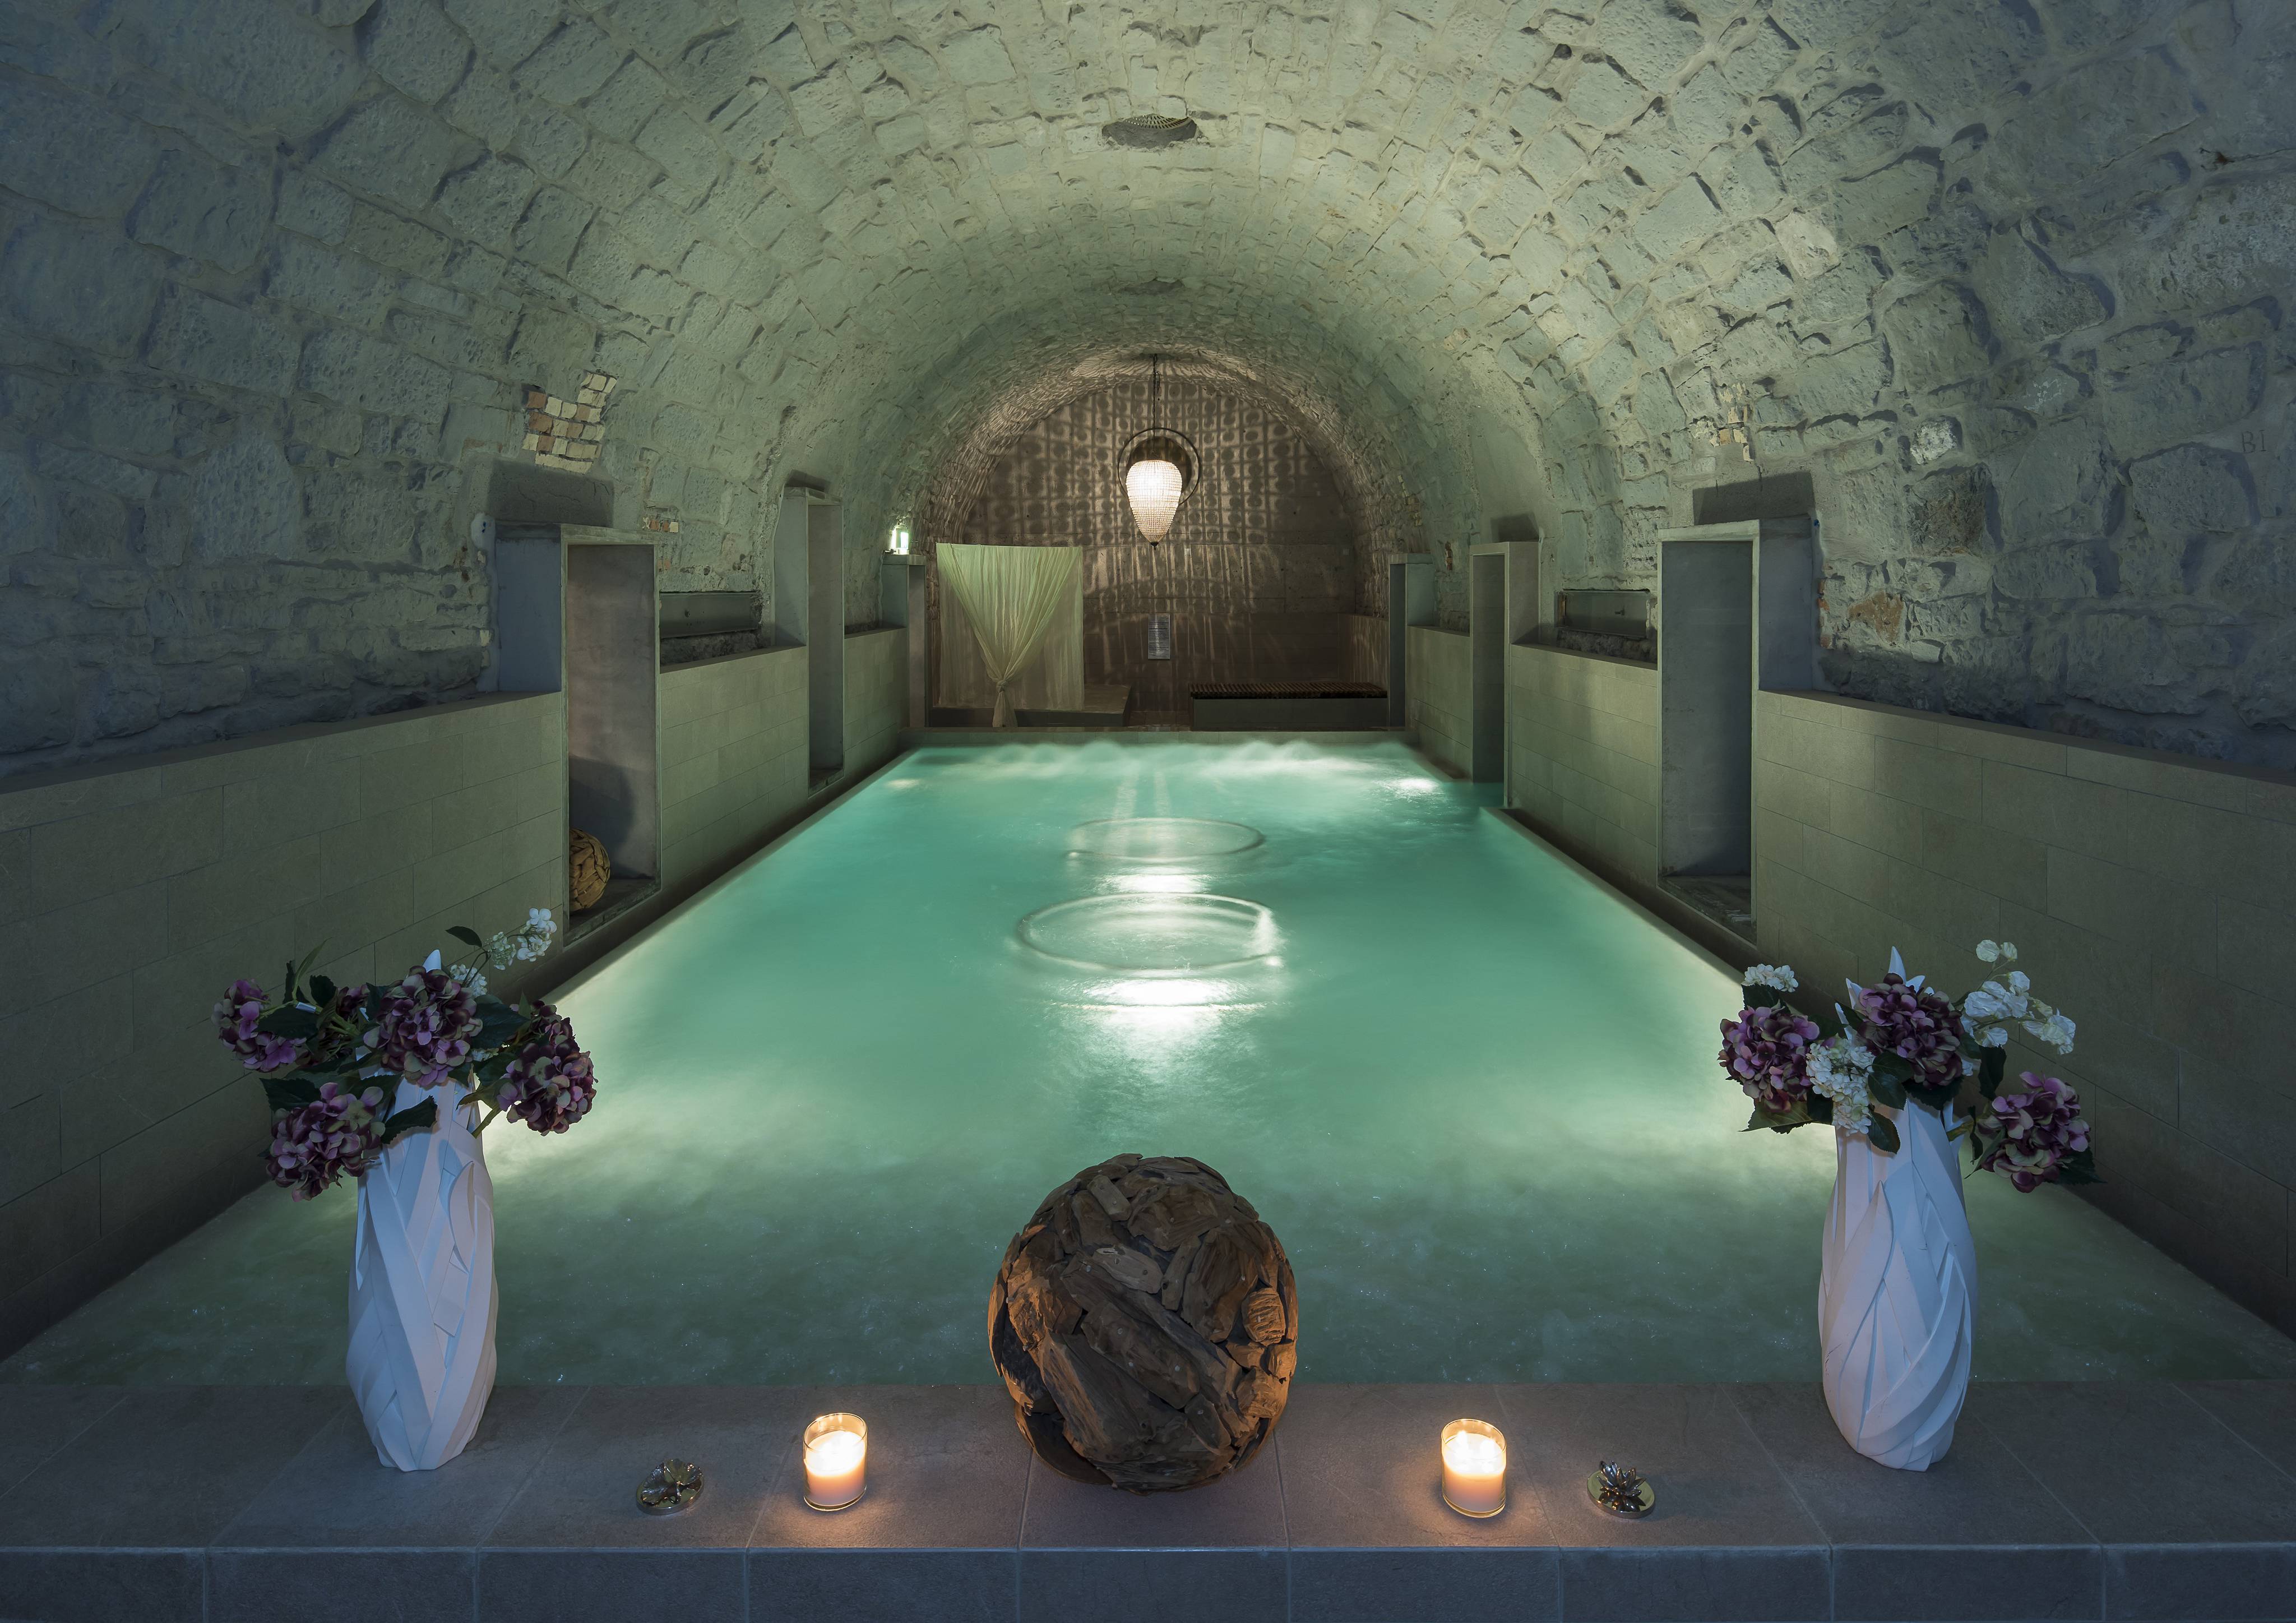 Vaulted cellar with pool at the Huerlimann Bath & Spa Zurich